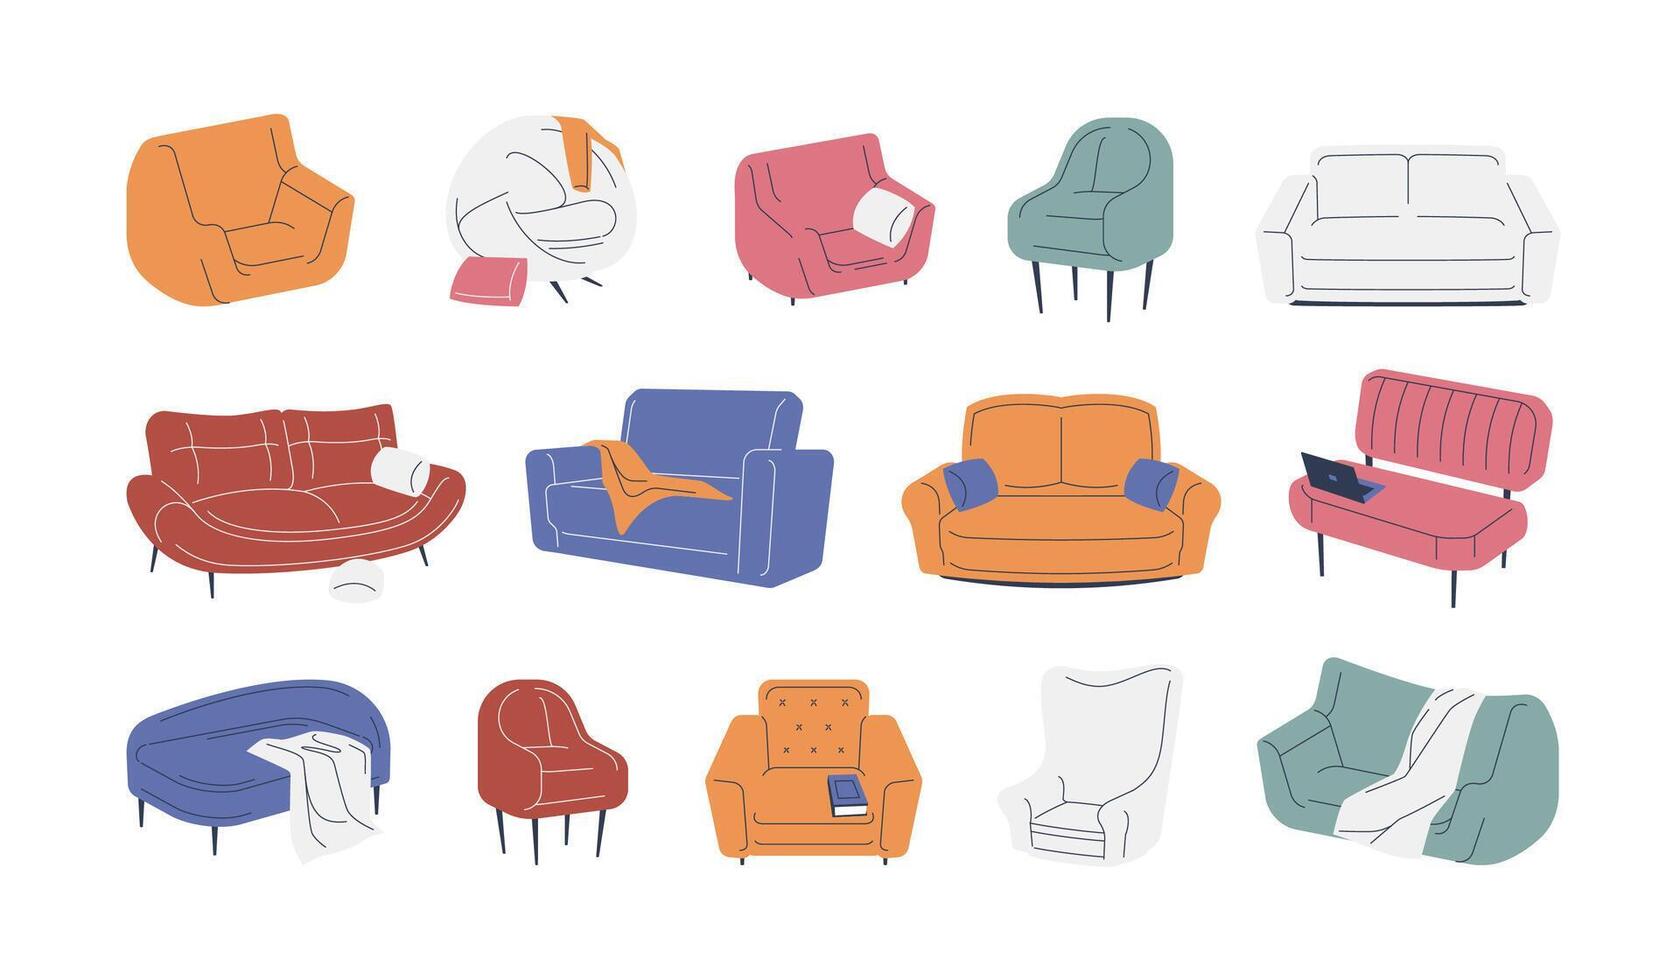 Sofas and armchairs. Modern cozy soft home furniture, colorful upholstered couch chair elements for room interior decoration. Vector cartoon set